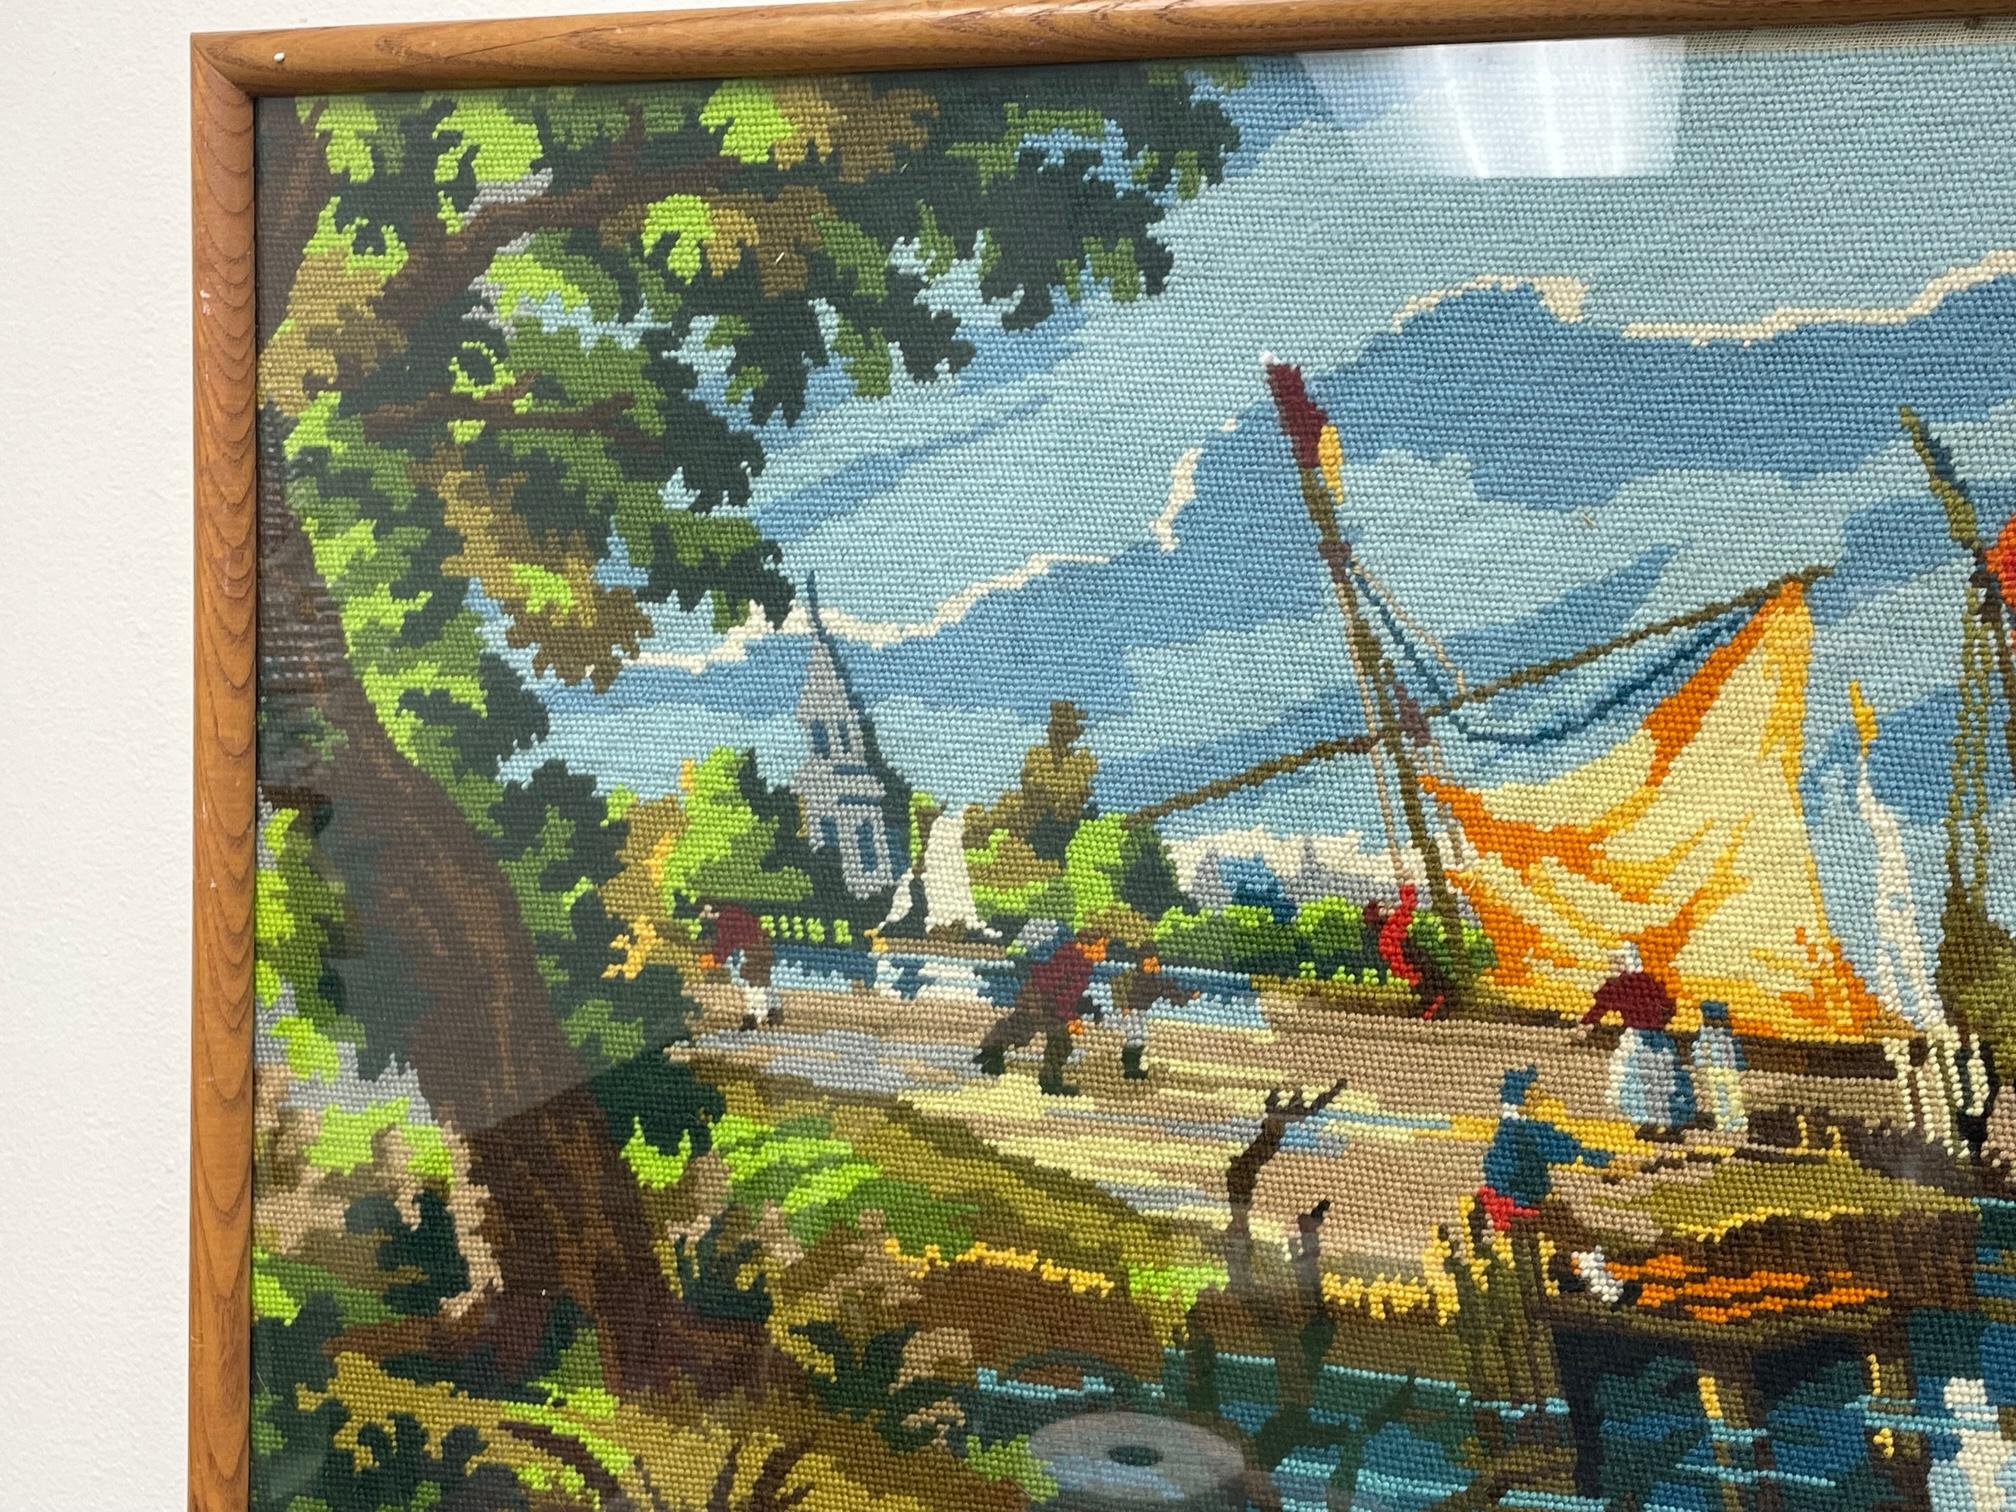 American Classical Framed Needlepoint Chinoiserie Sailboat River Scene For Sale